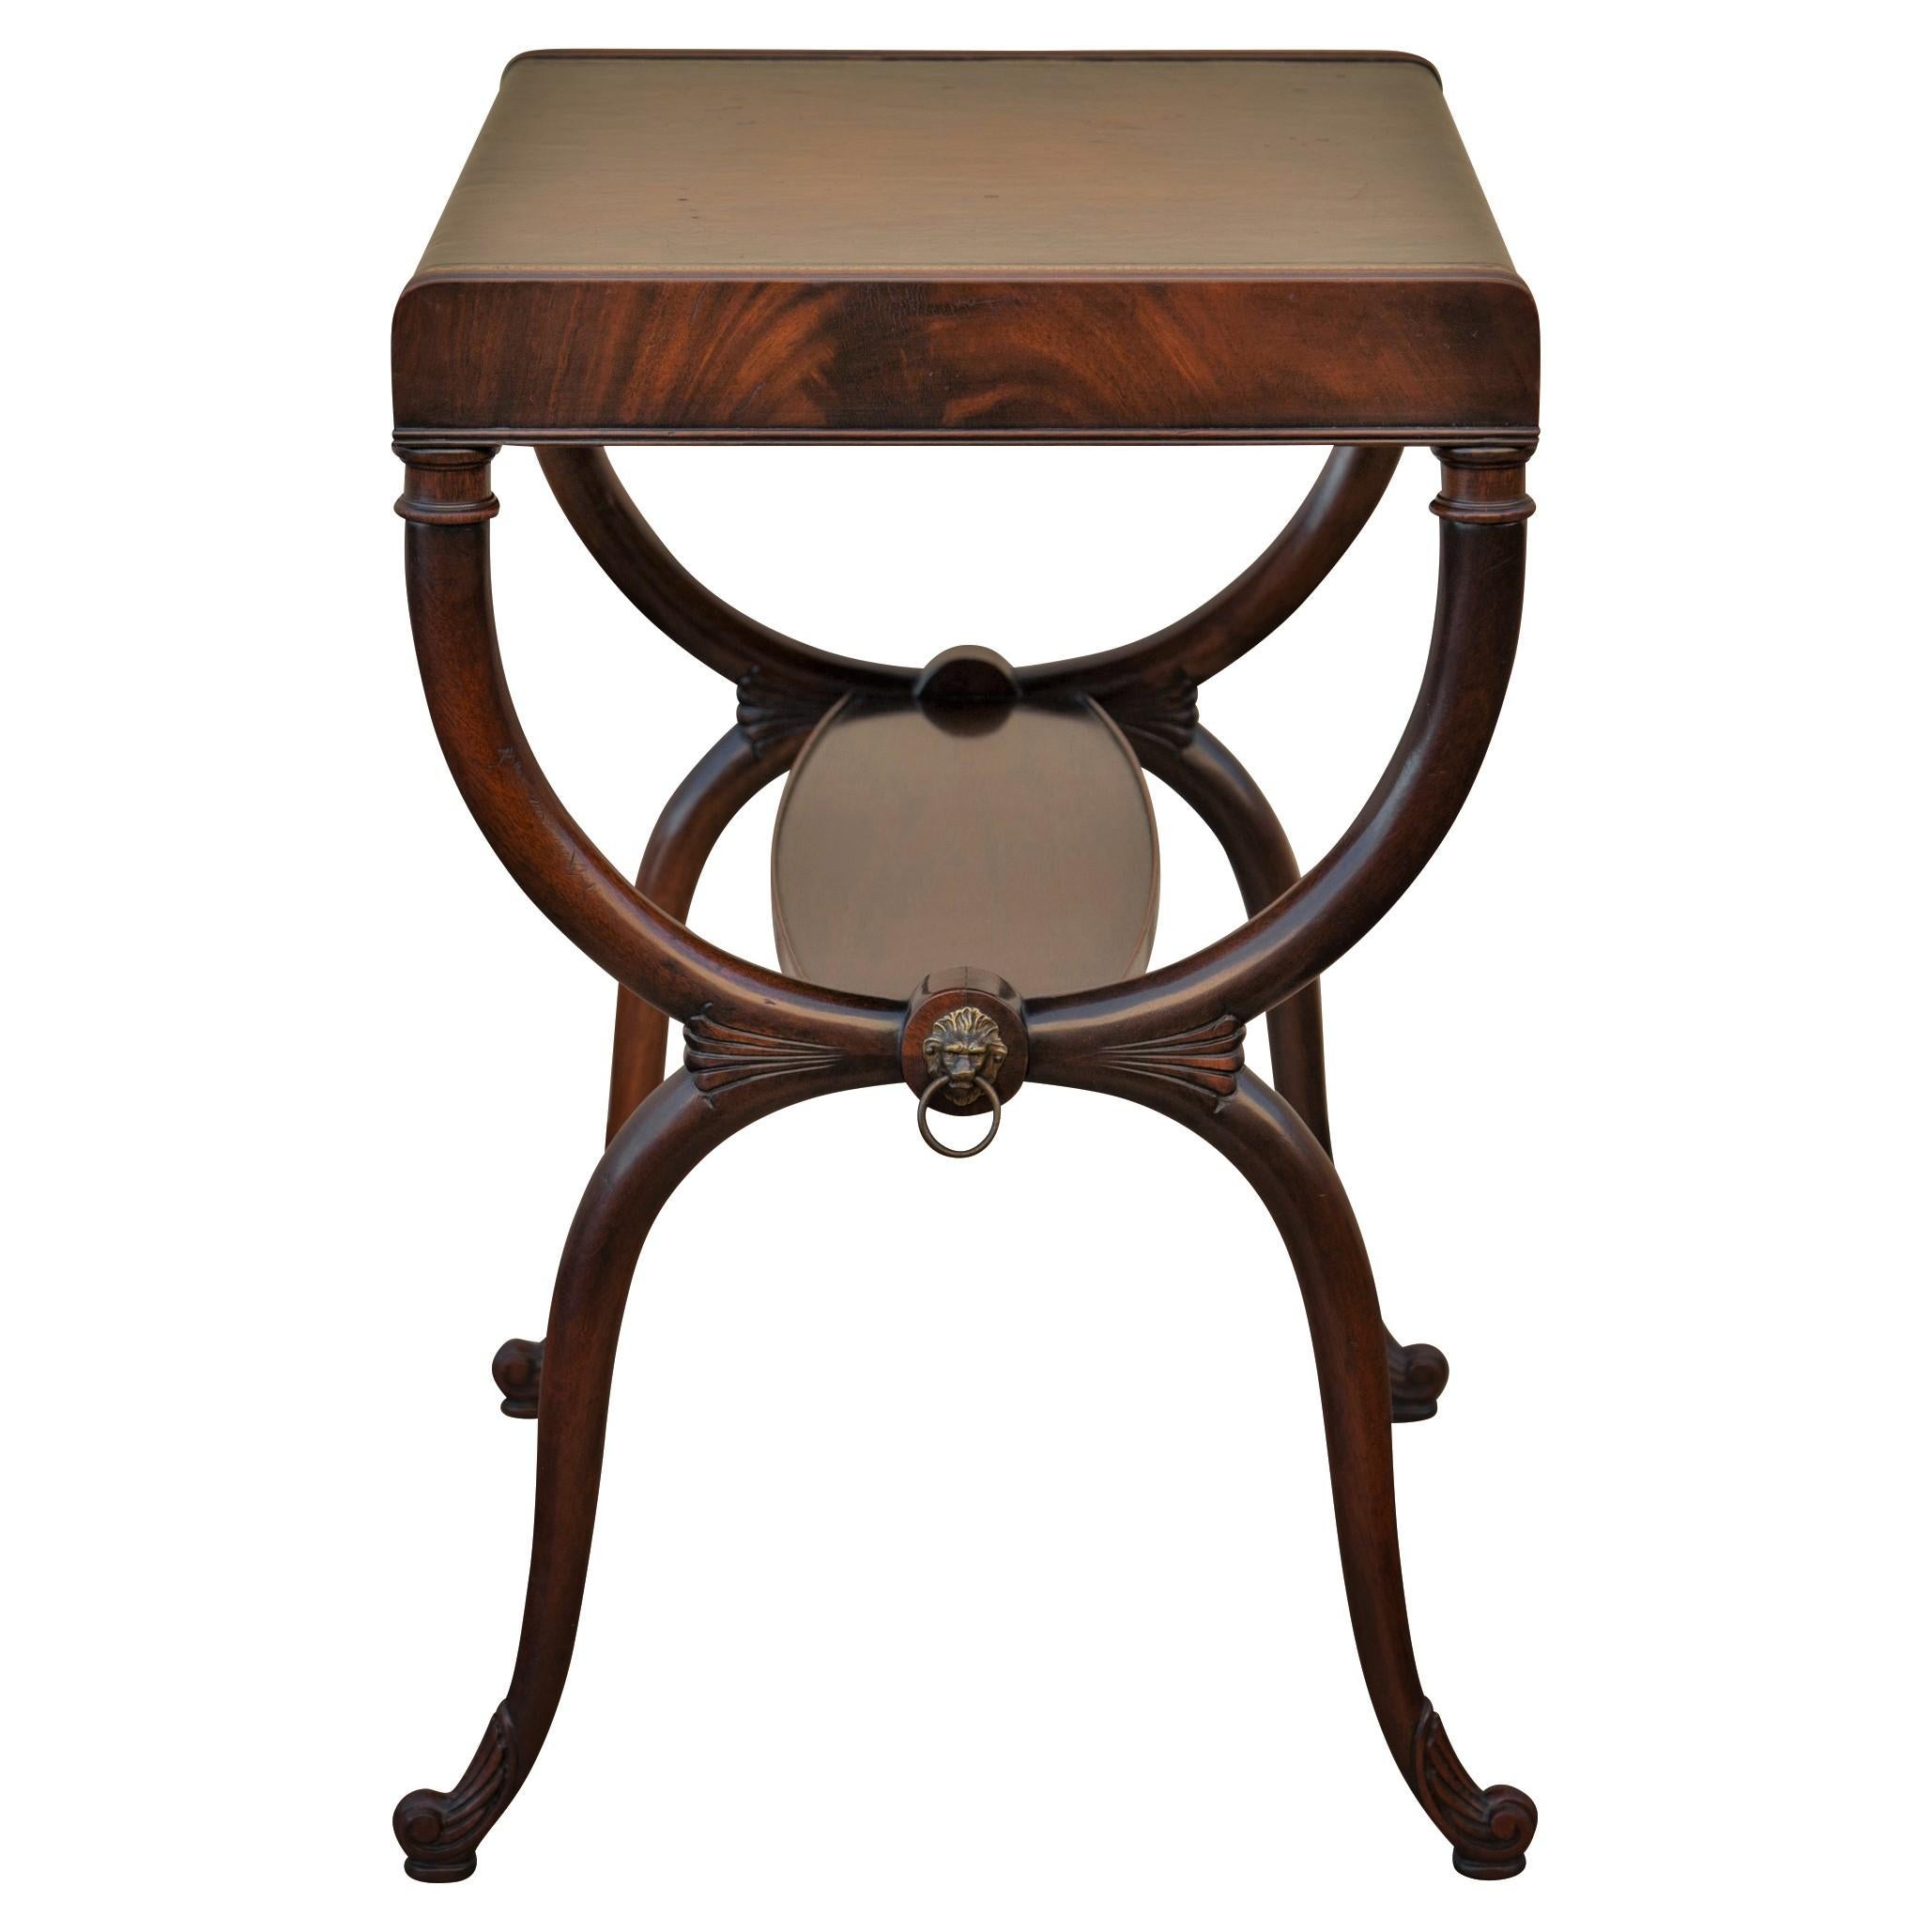 American Regency Leather Top Mahogany Side Table with Curule Legs